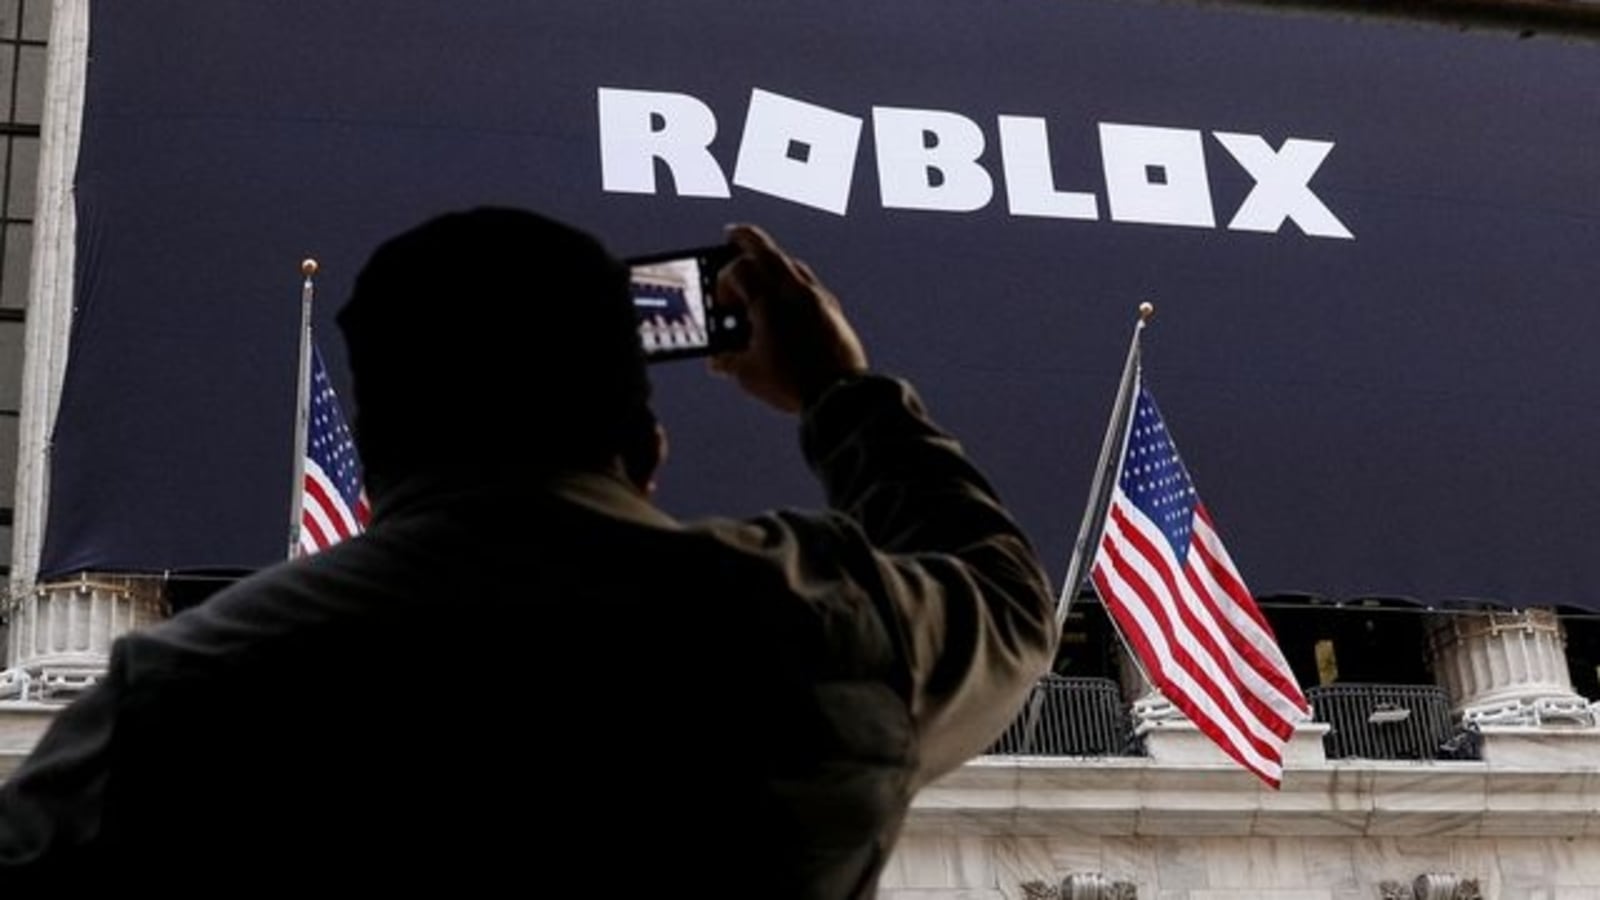 Roblox Grows In Popularity